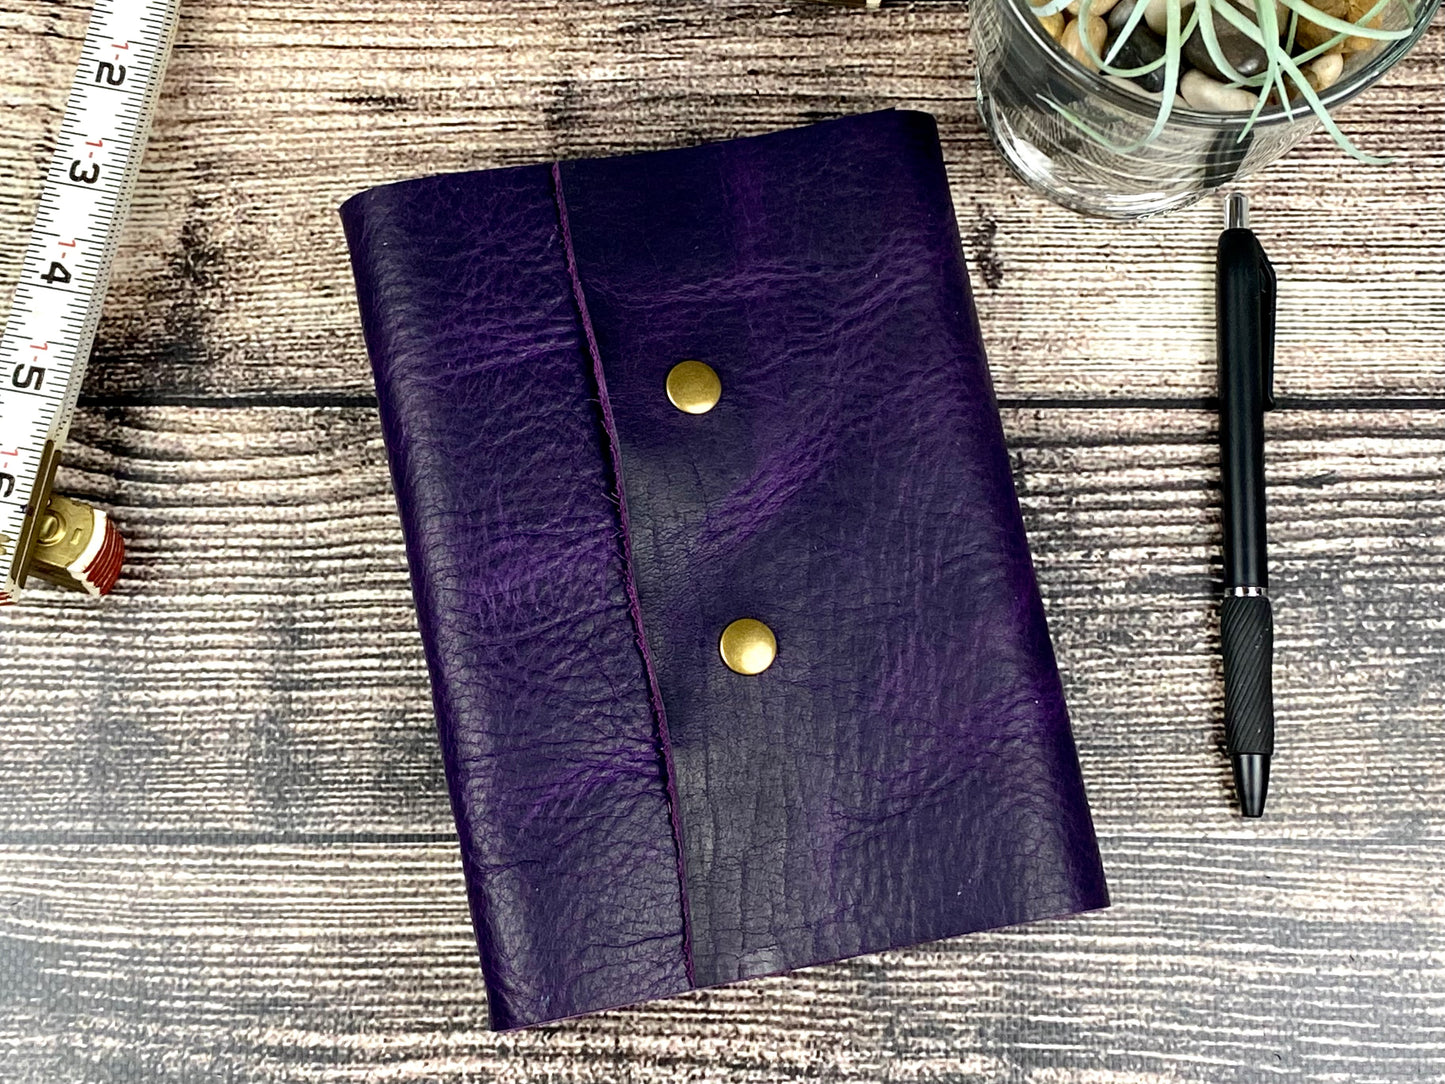 5x7 Lined Journal - Grape Bison Leather with snaps